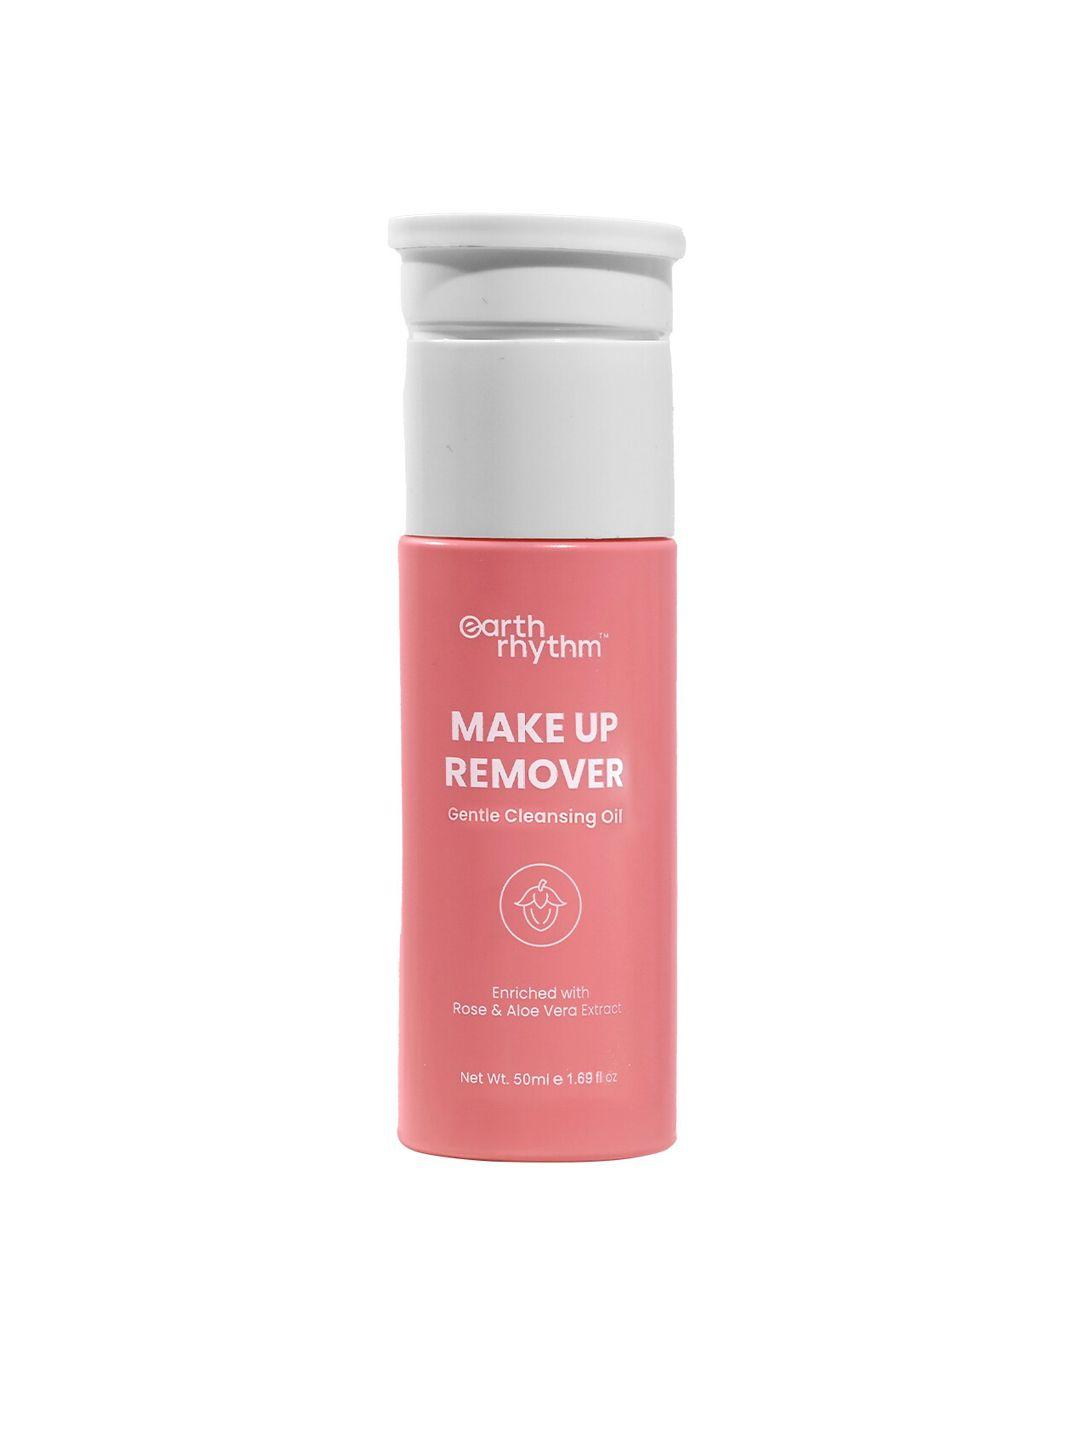 earth rhythm makeup remover gentle cleansing oil - 50ml